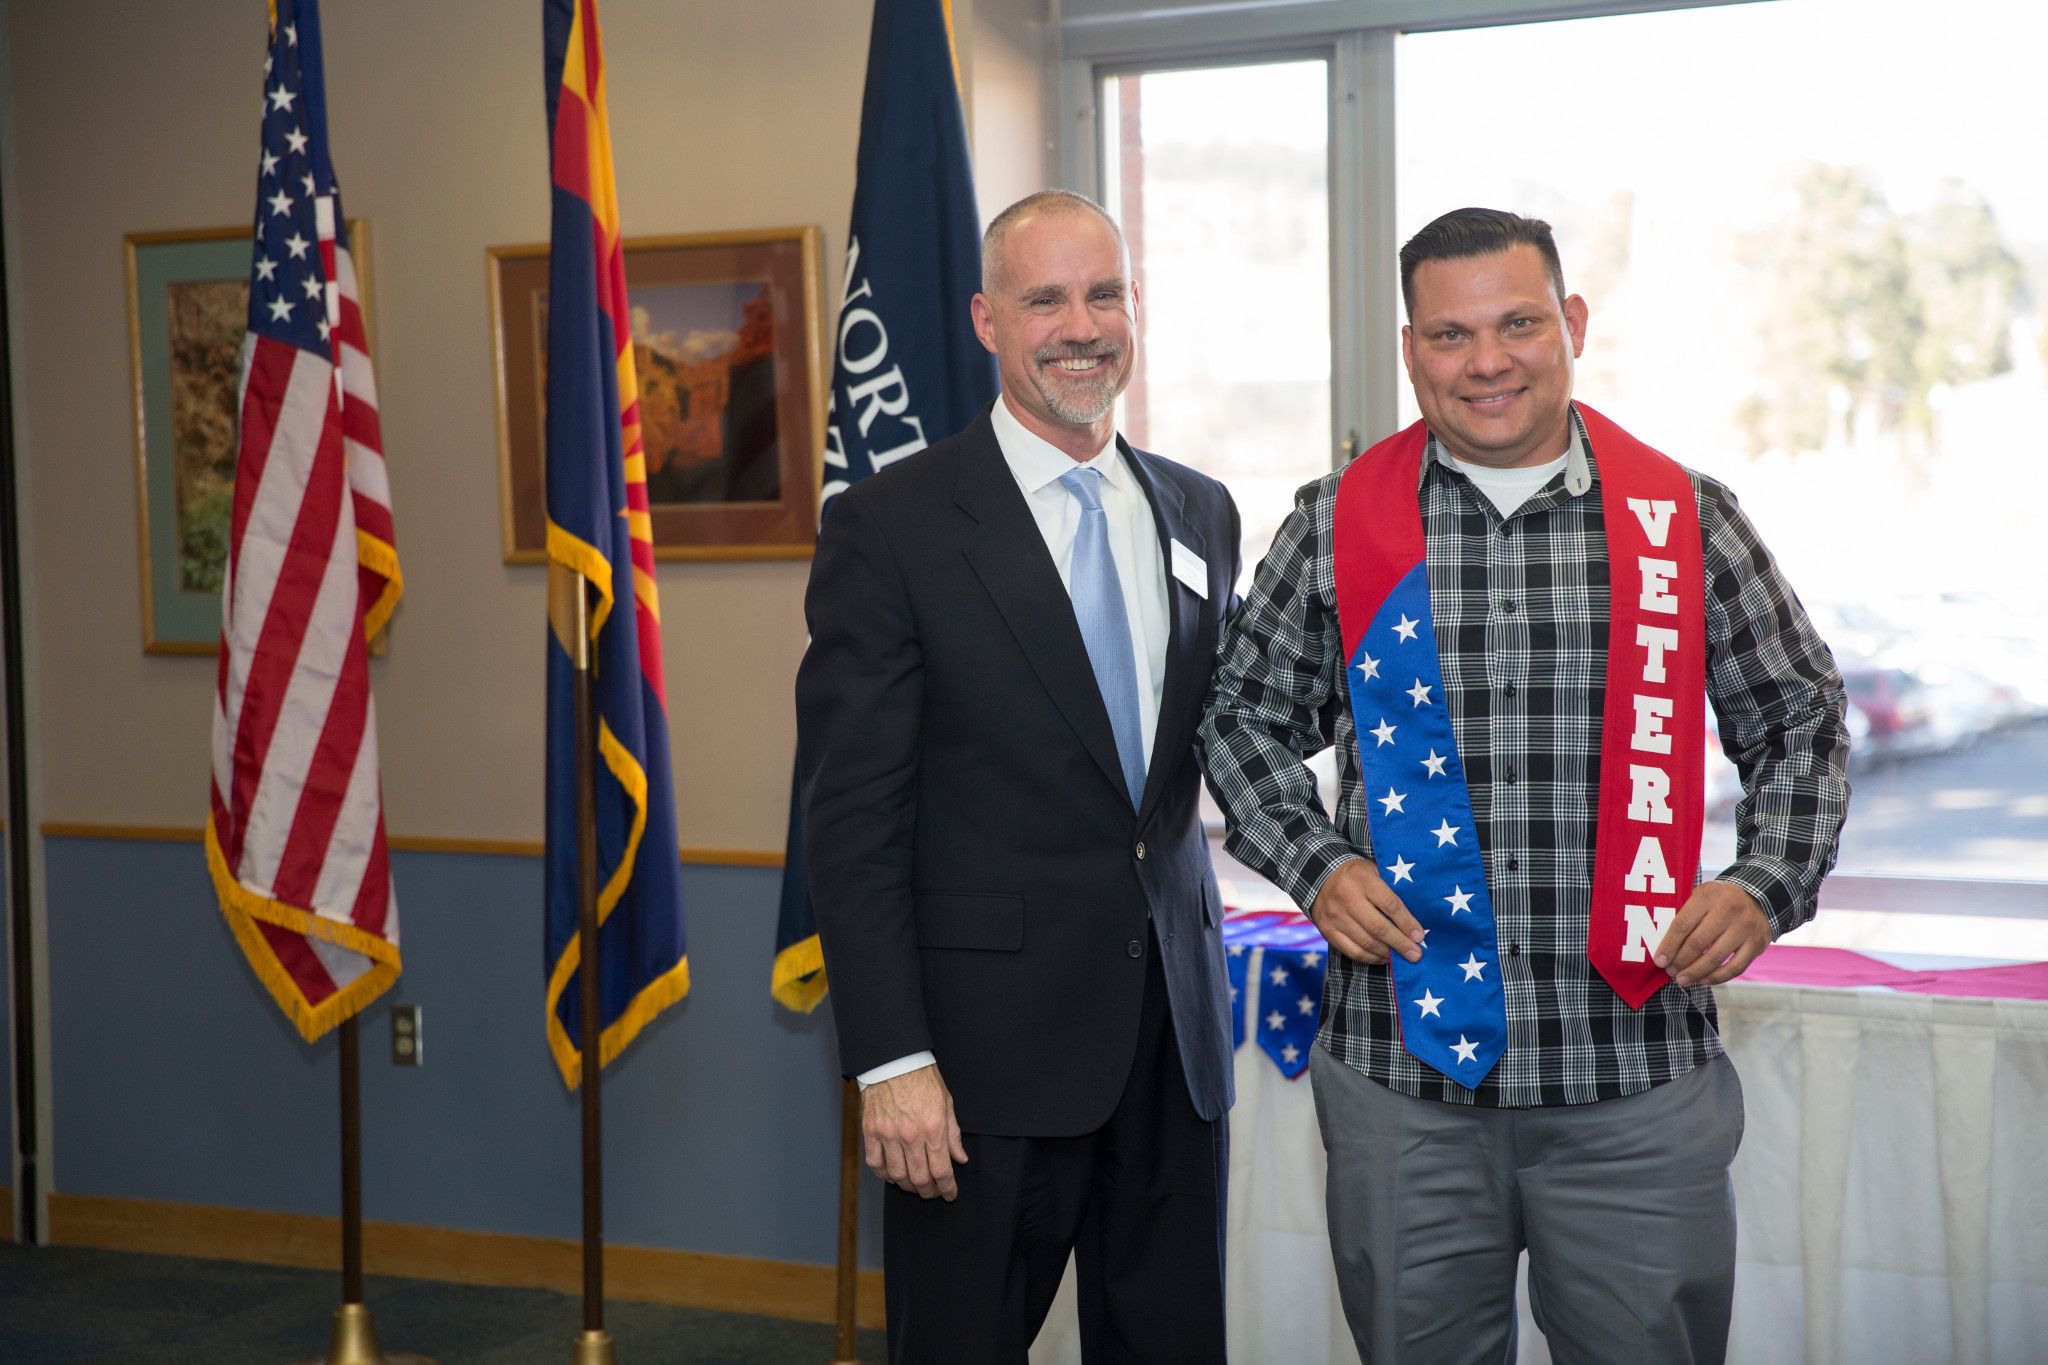 Two veterans are posing for the camera together at the Vet Convocation